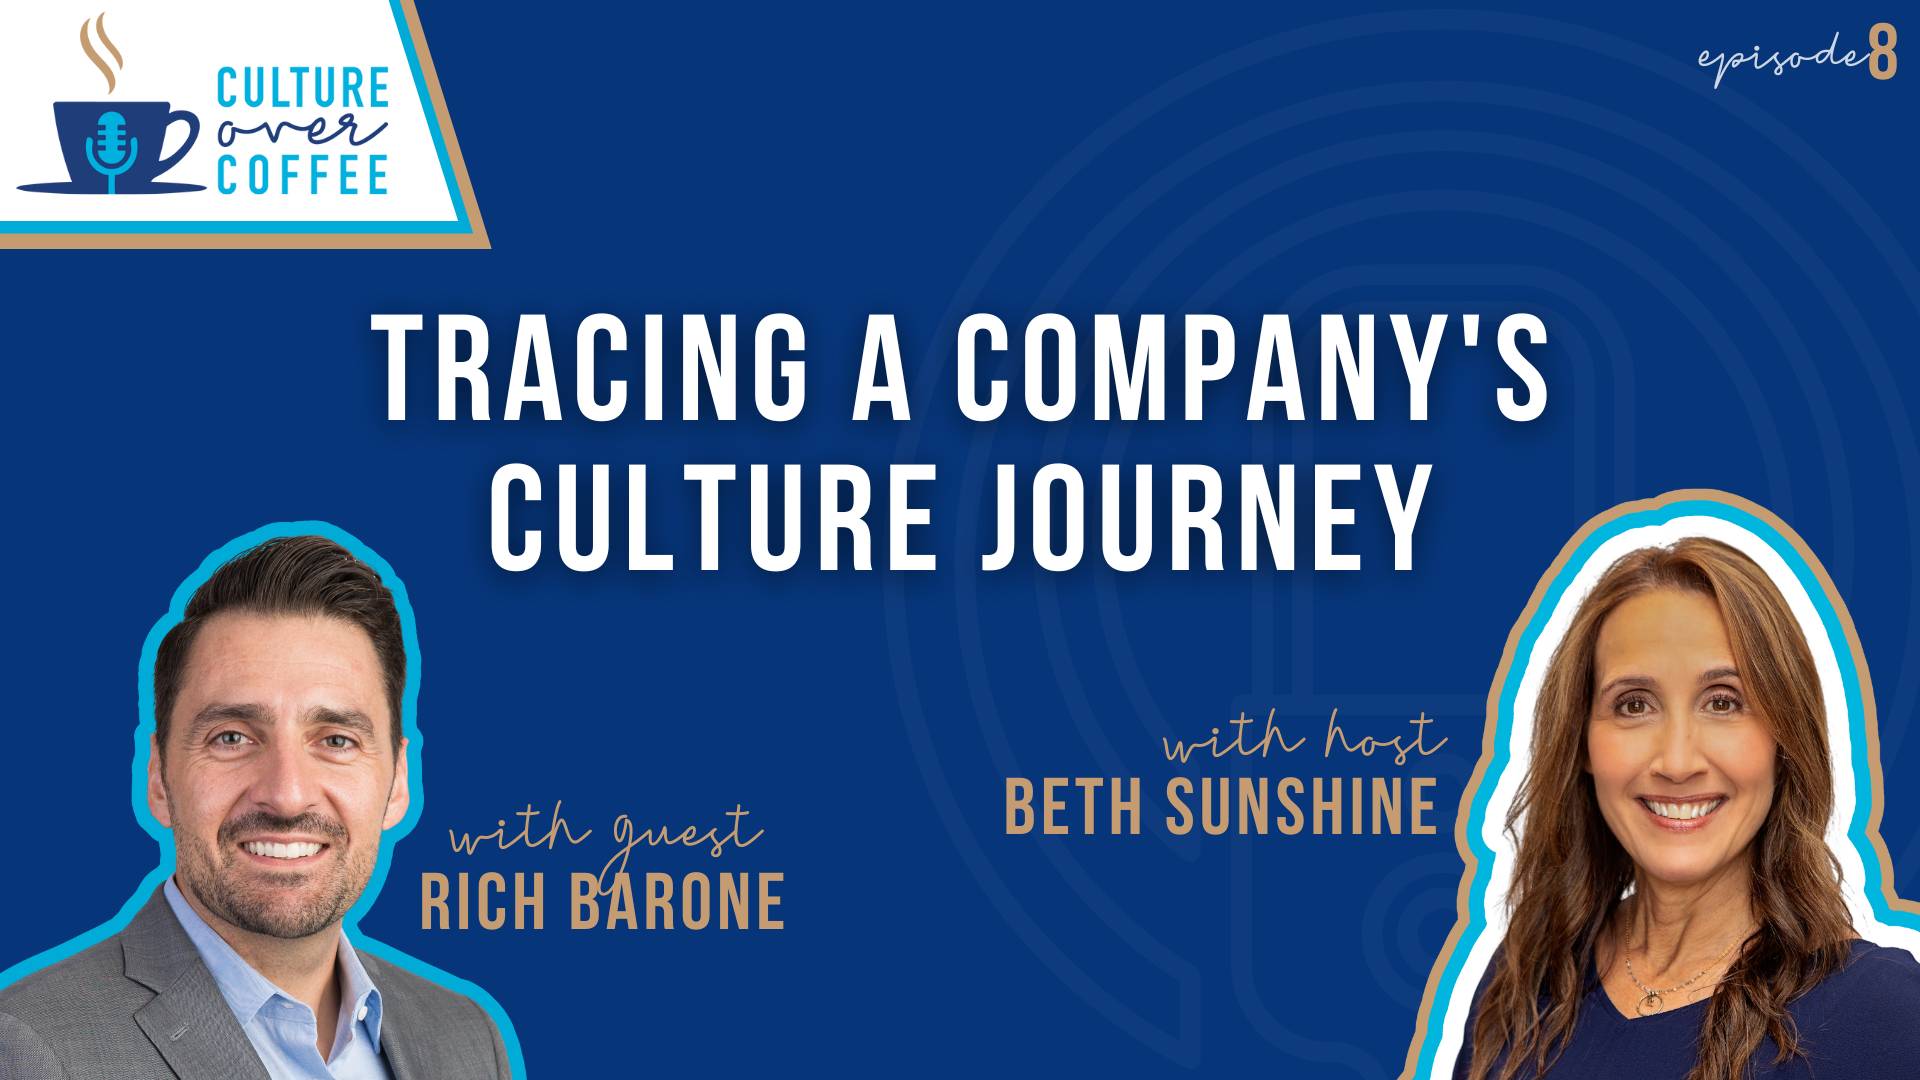 Culture Over Coffee Podcast: Tracing a Company’s Culture Journey with Rich Barone